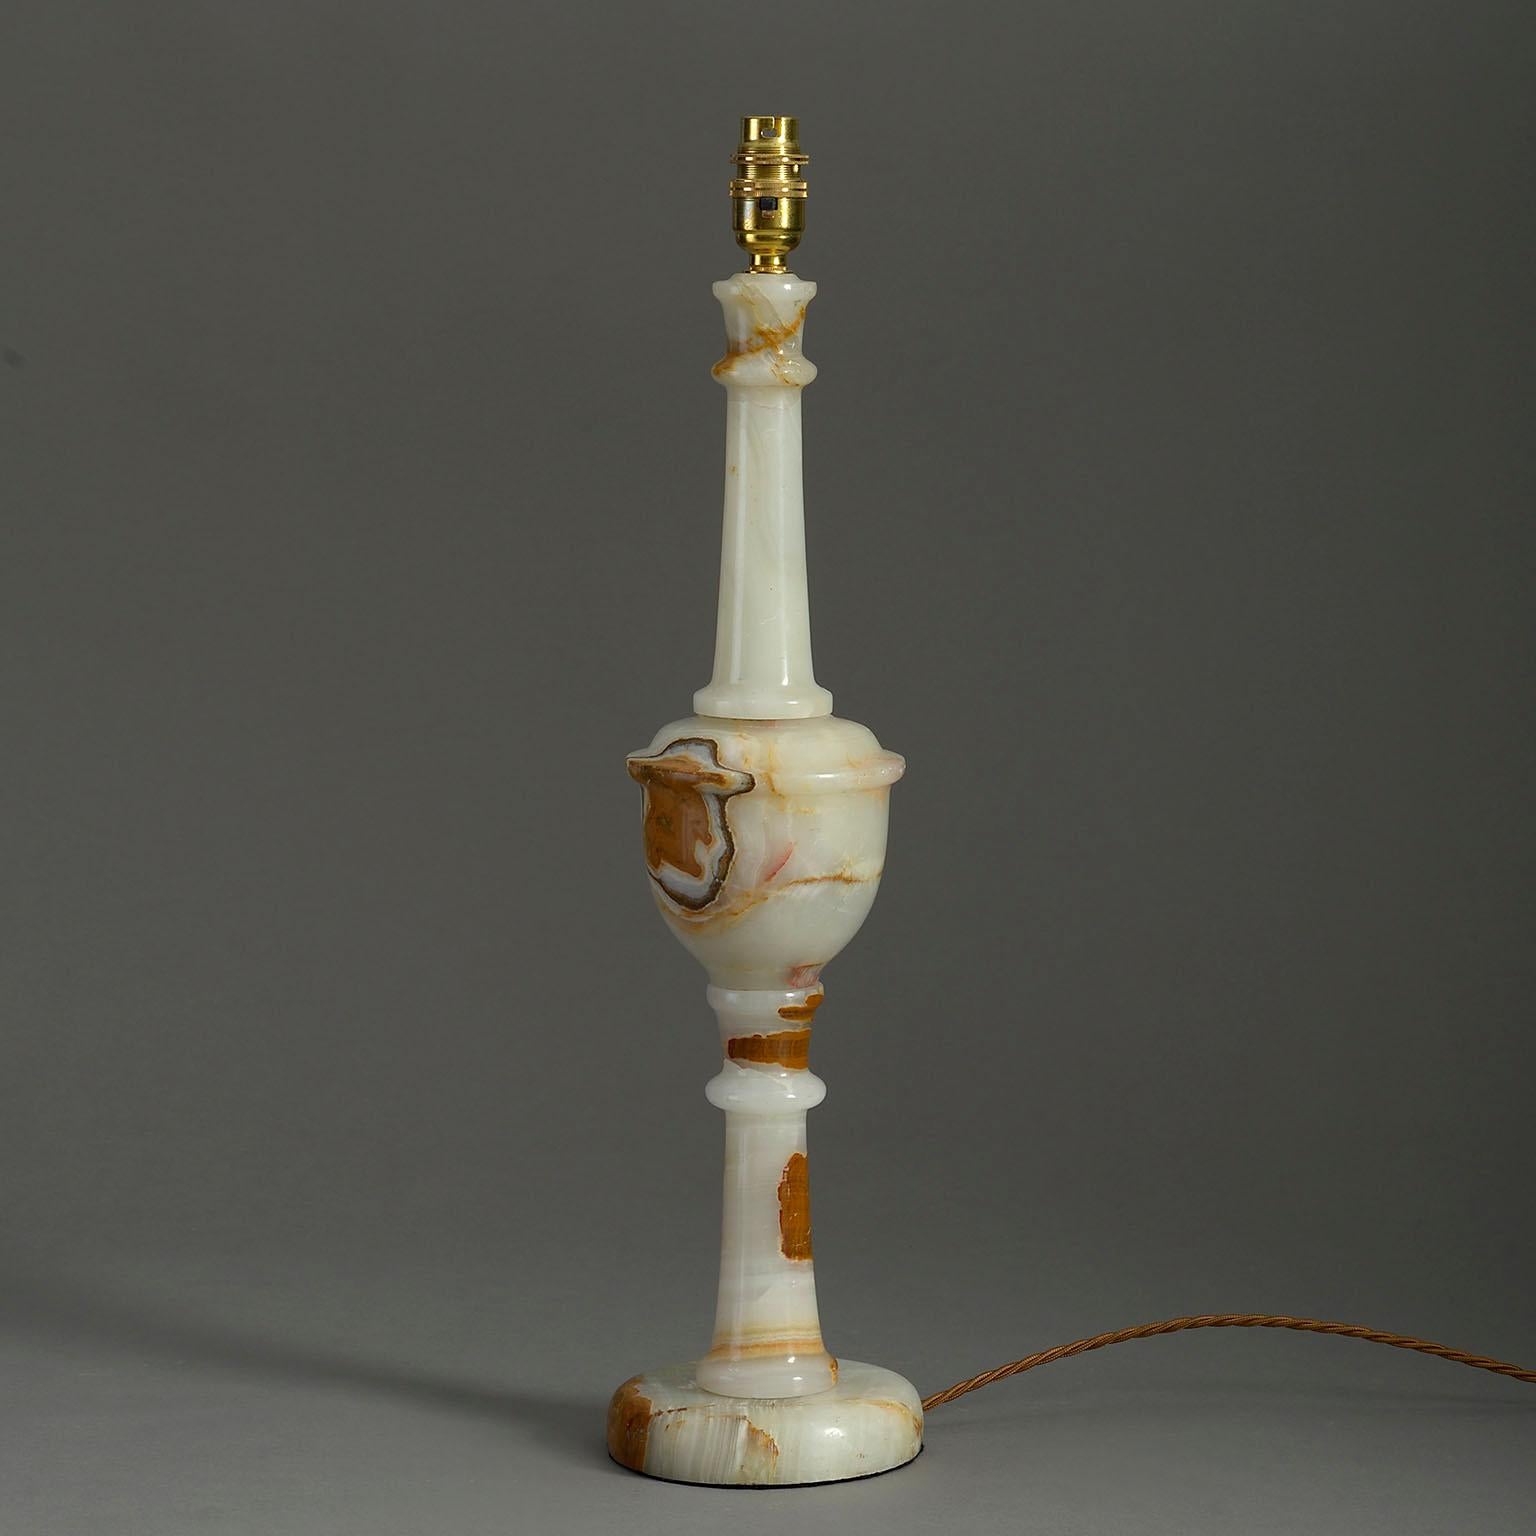 A mid-twentieth century tall turned alabaster column lamp with rich veining.

Dimensions refer to alabaster parts only.

Wired to UK standards. This lamp can be rewired to all international specifications inclusive of price.

Shades available to